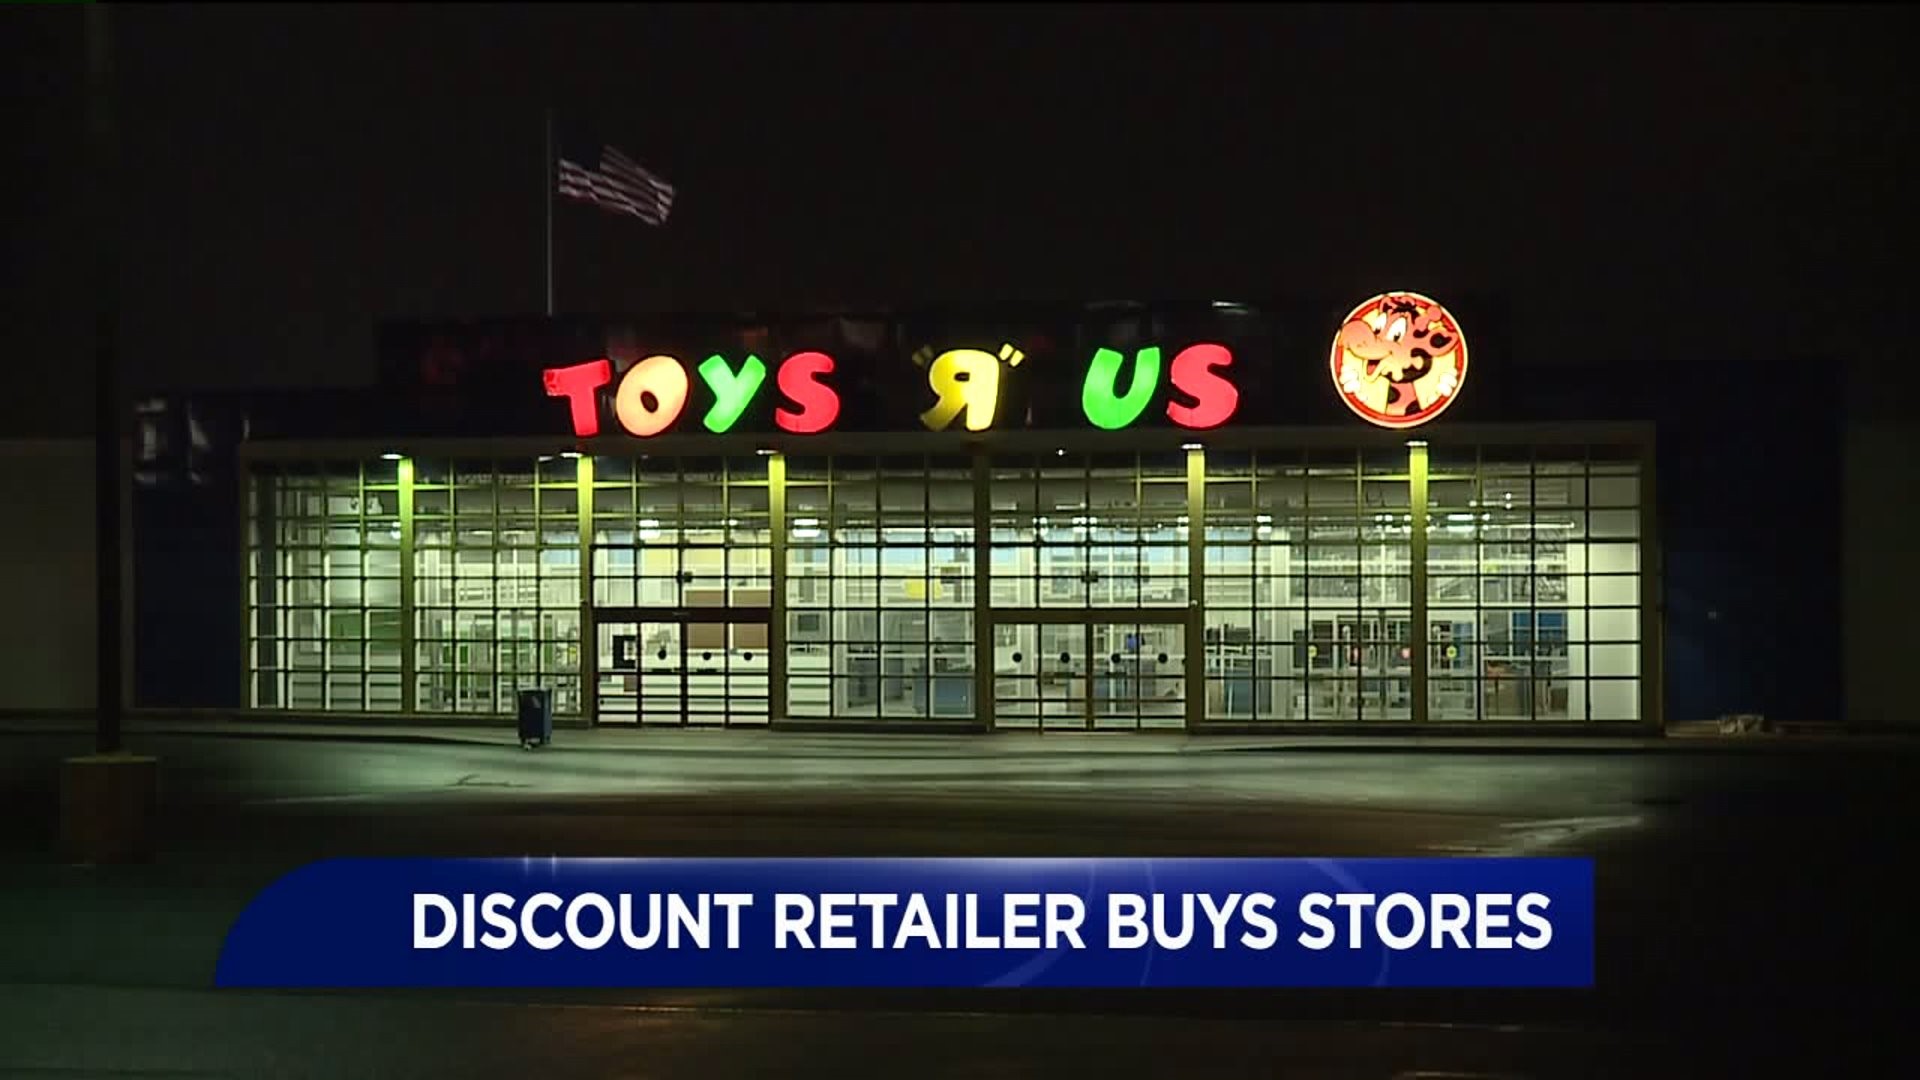 Discount Retailer Moving into Two Former Toys 'R' Us Stores